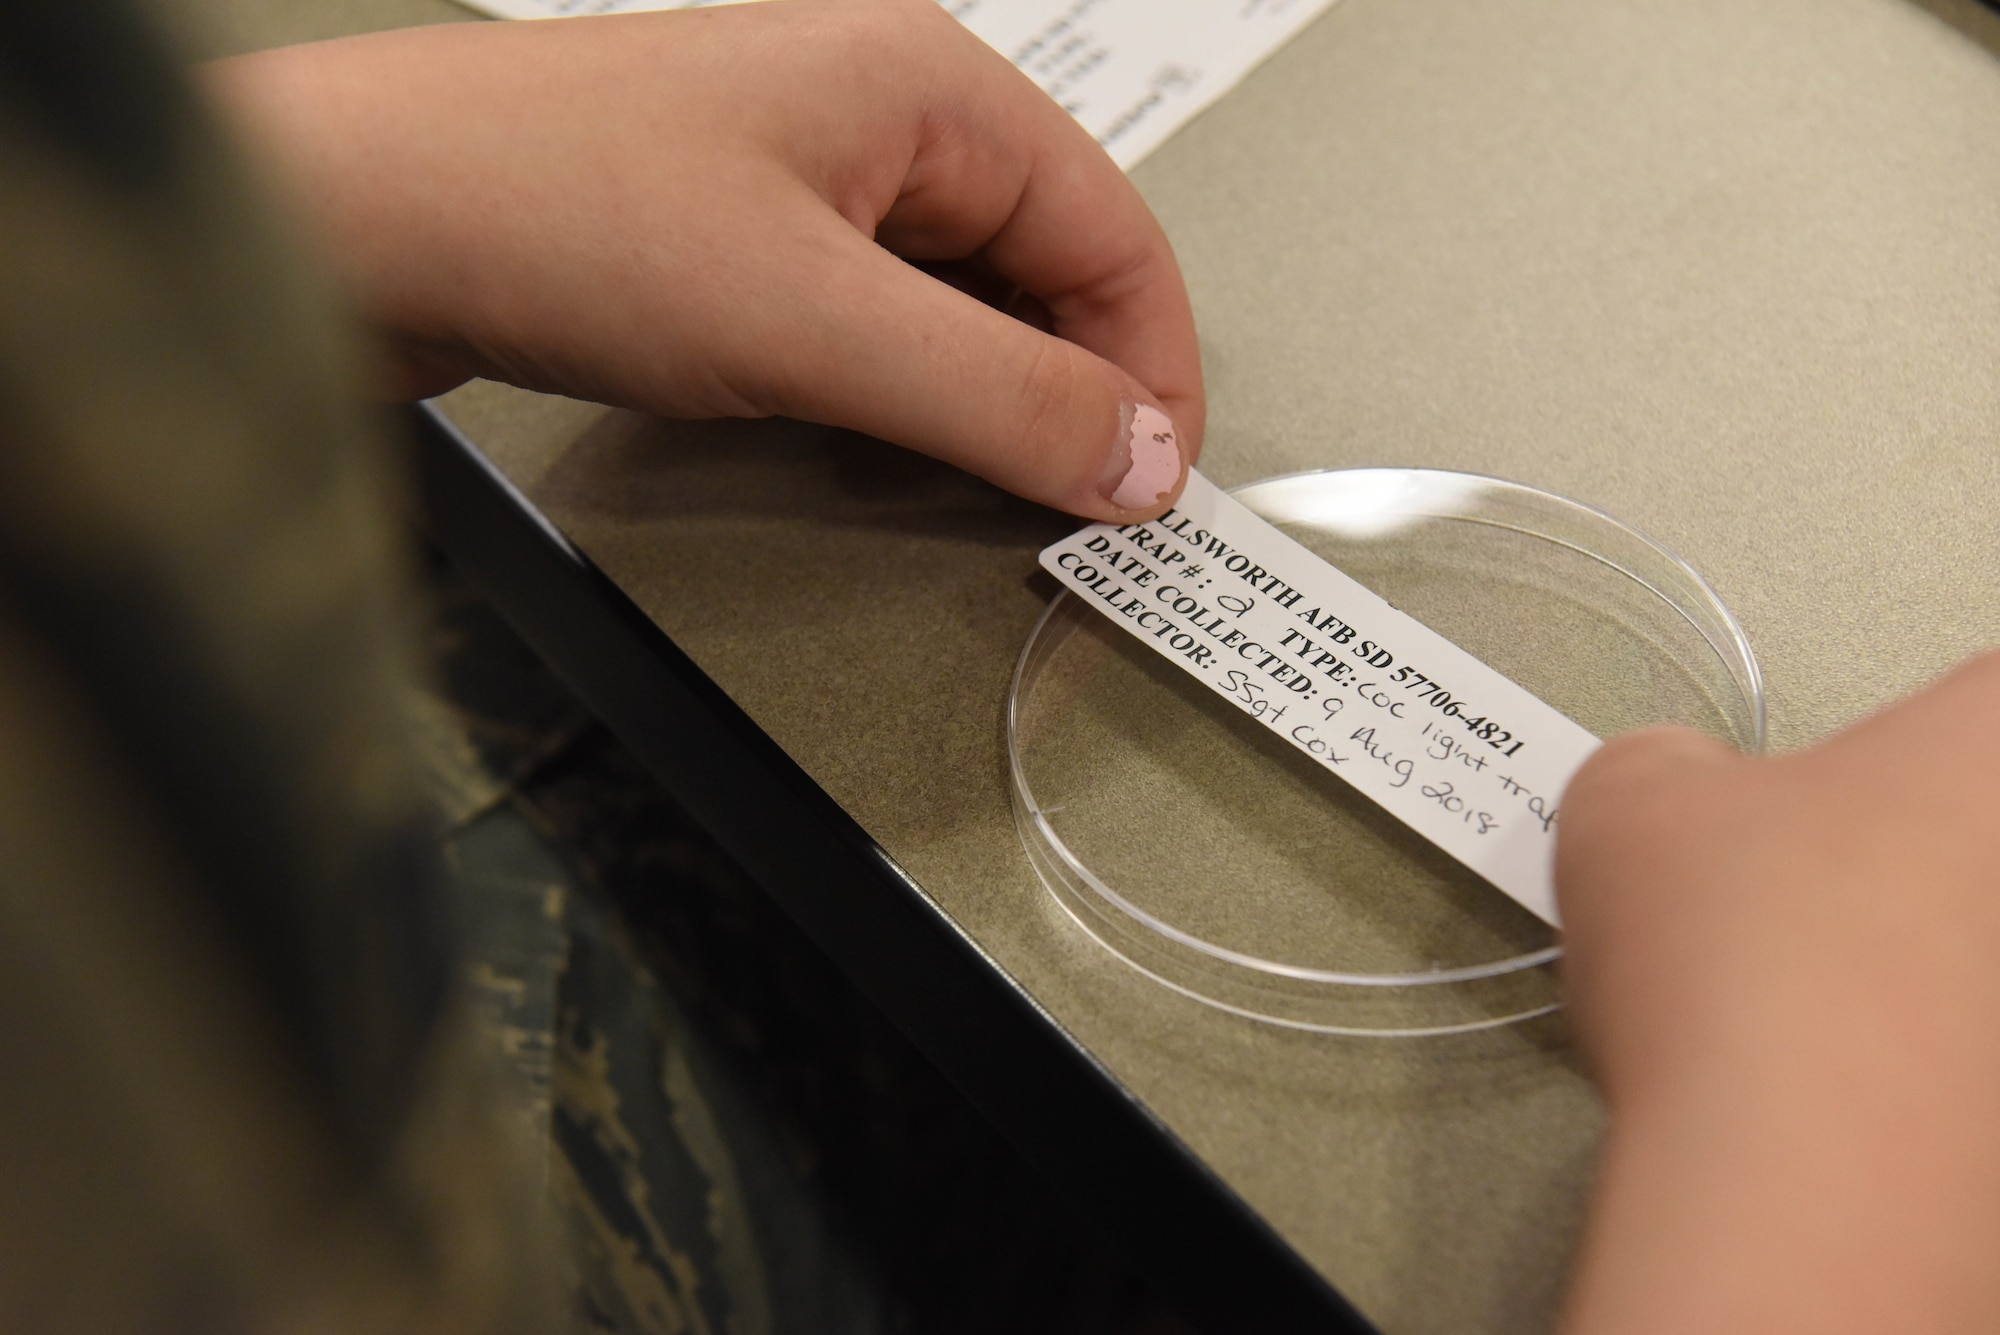 Staff Sgt. Sarah Cox, the 28th Medical Group noncommissioned officer in charge of community health, places a label on a container filled with mosquitoes at Ellsworth Air Force Base, S.D., Aug. 9, 2018. The 28th MDG public health flight sent more than 700 mosquitoes to the U.S. Air Force School of Aerospace Medicine at Wright-Patterson Air Force Base, Ohio, to test for diseases. (U.S. Air Force photo by Airman 1st Class Thomas Karol)